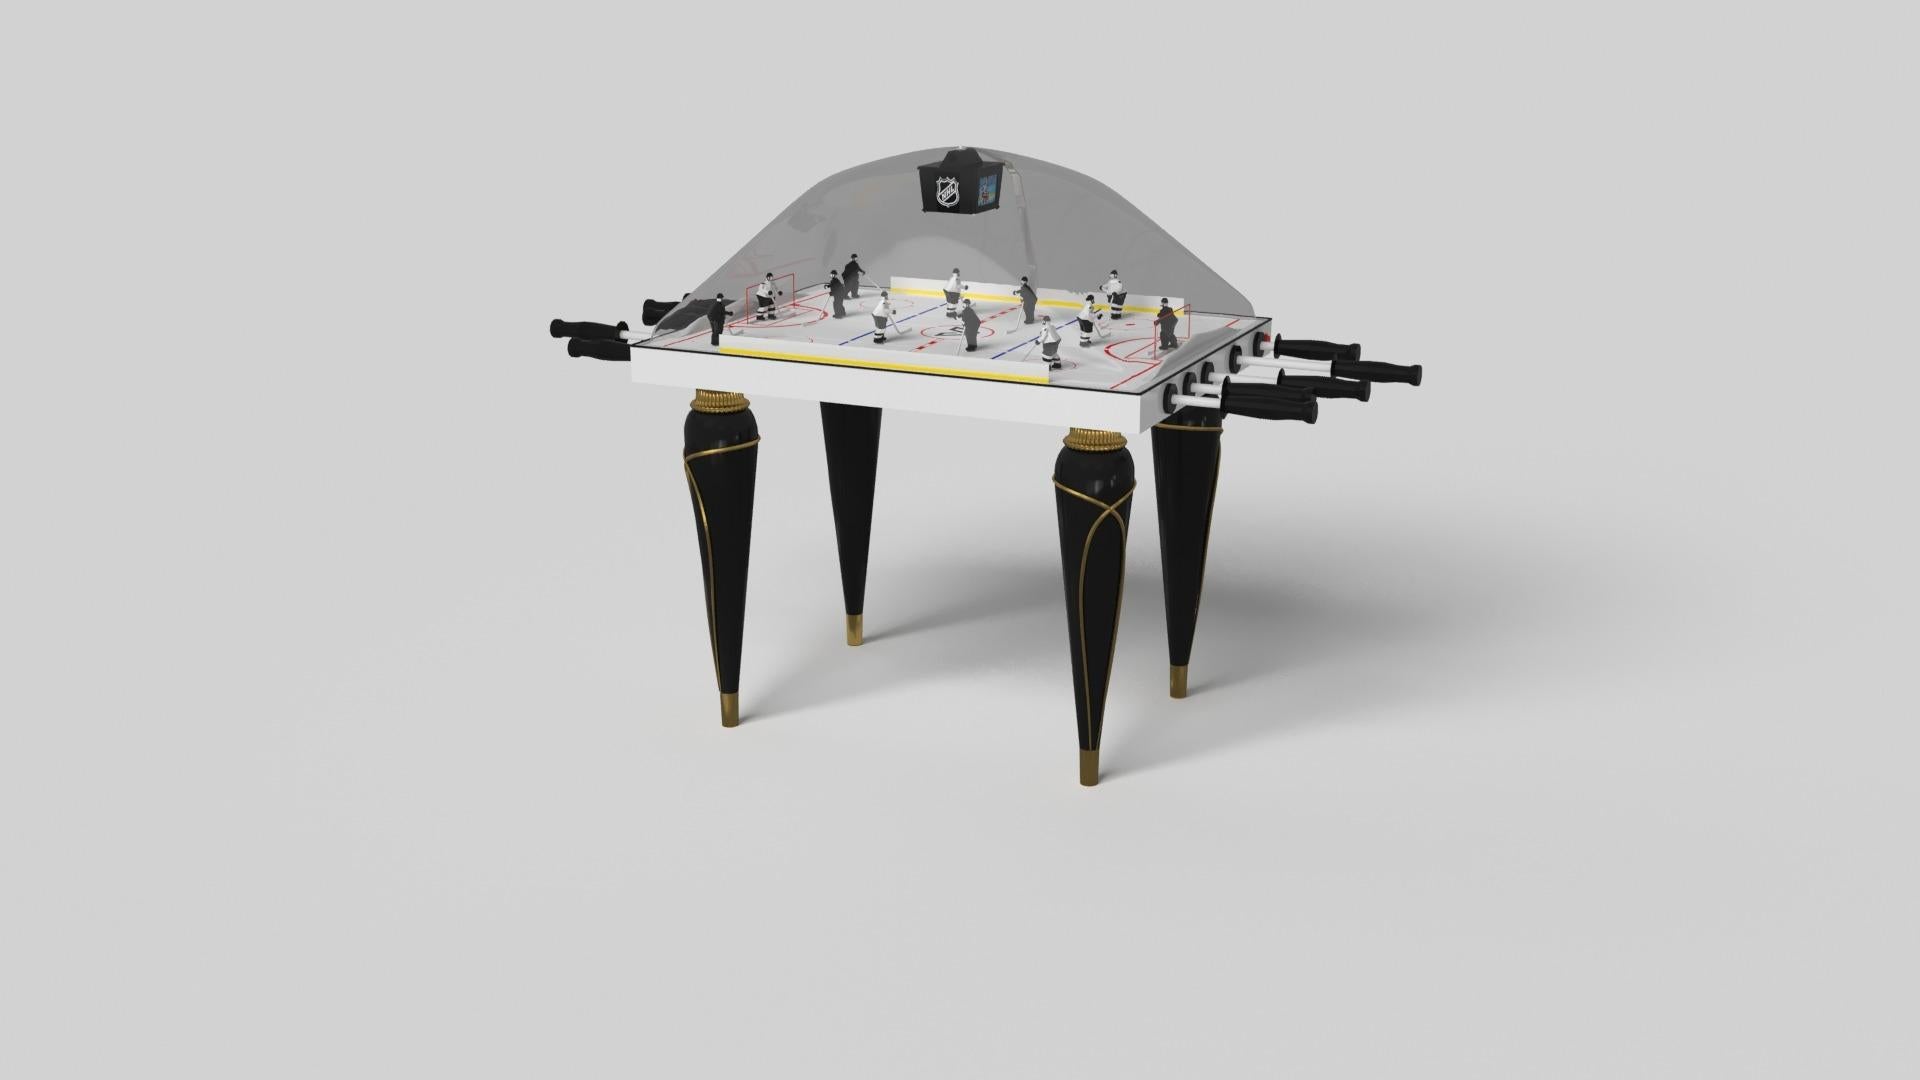 Champagne gold accents add undeniable elegance to this luxury dome hockey table. Offering superior playability and uncompromised style, this design features hand carved details, decorative metal elements, and metal sabots at the bottom of each leg.